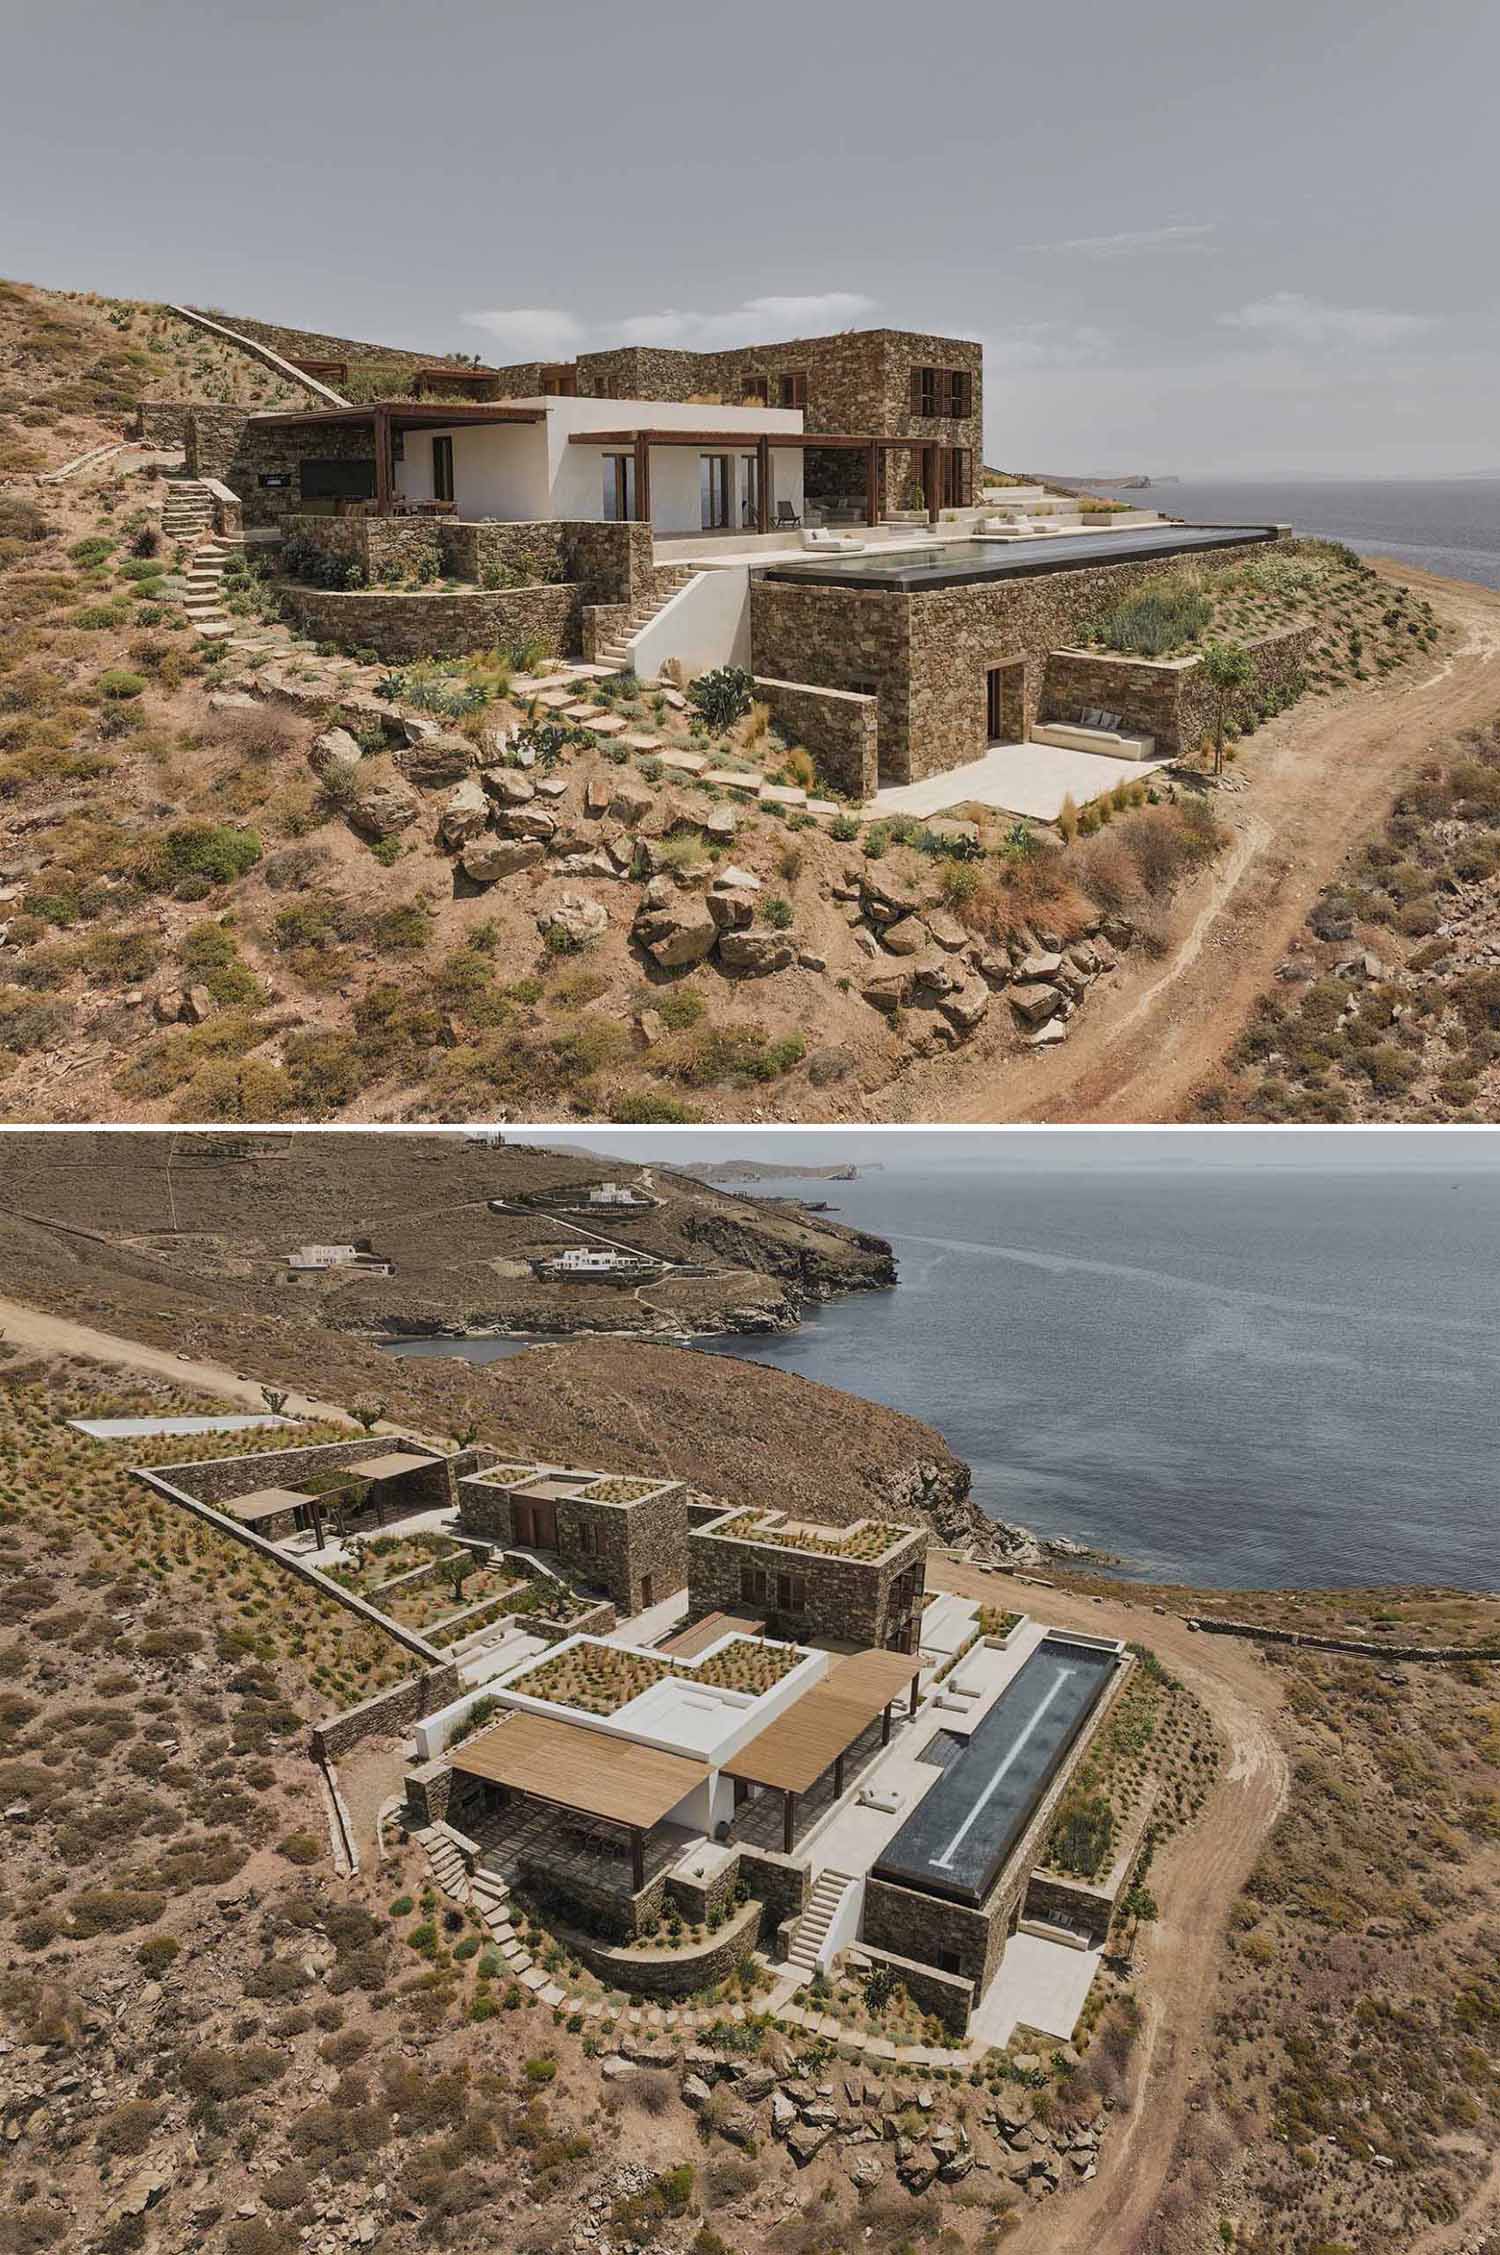 Key to the design of this modern home are the multiple green roofs that help the home seamlessly blend into the surrounding landscape.